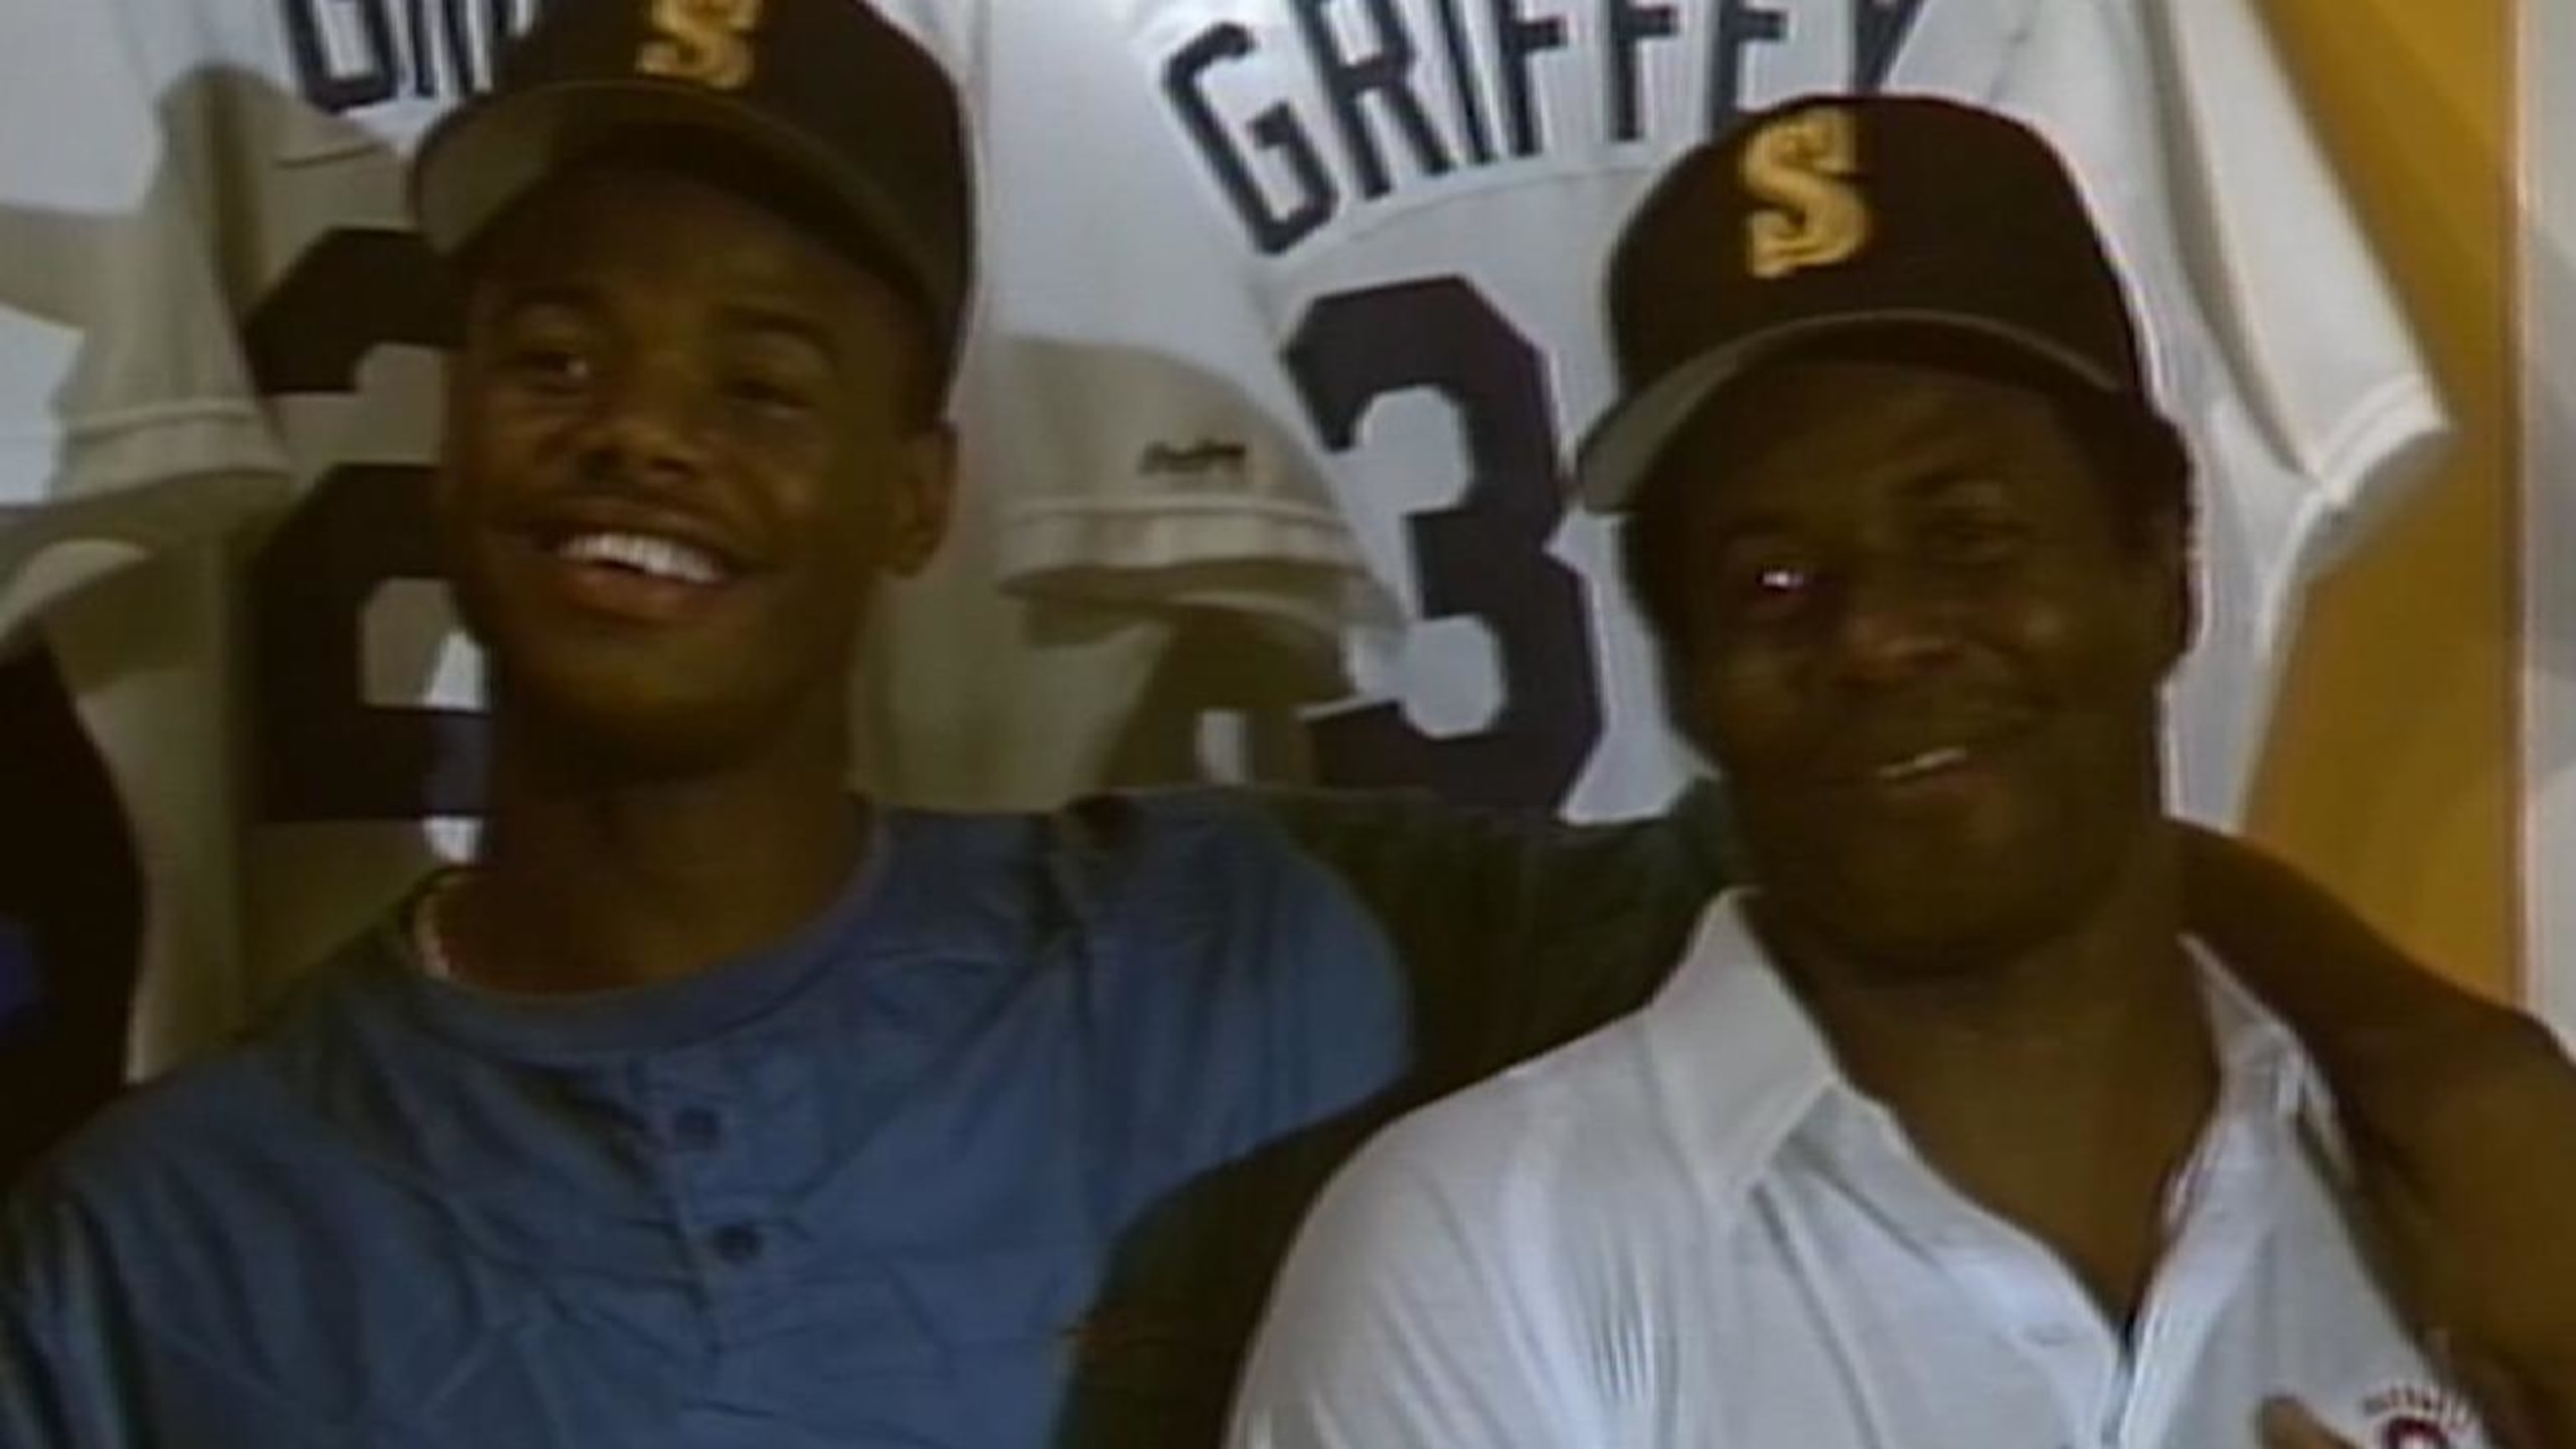 MLB's 10 best father/son teams based on WAR